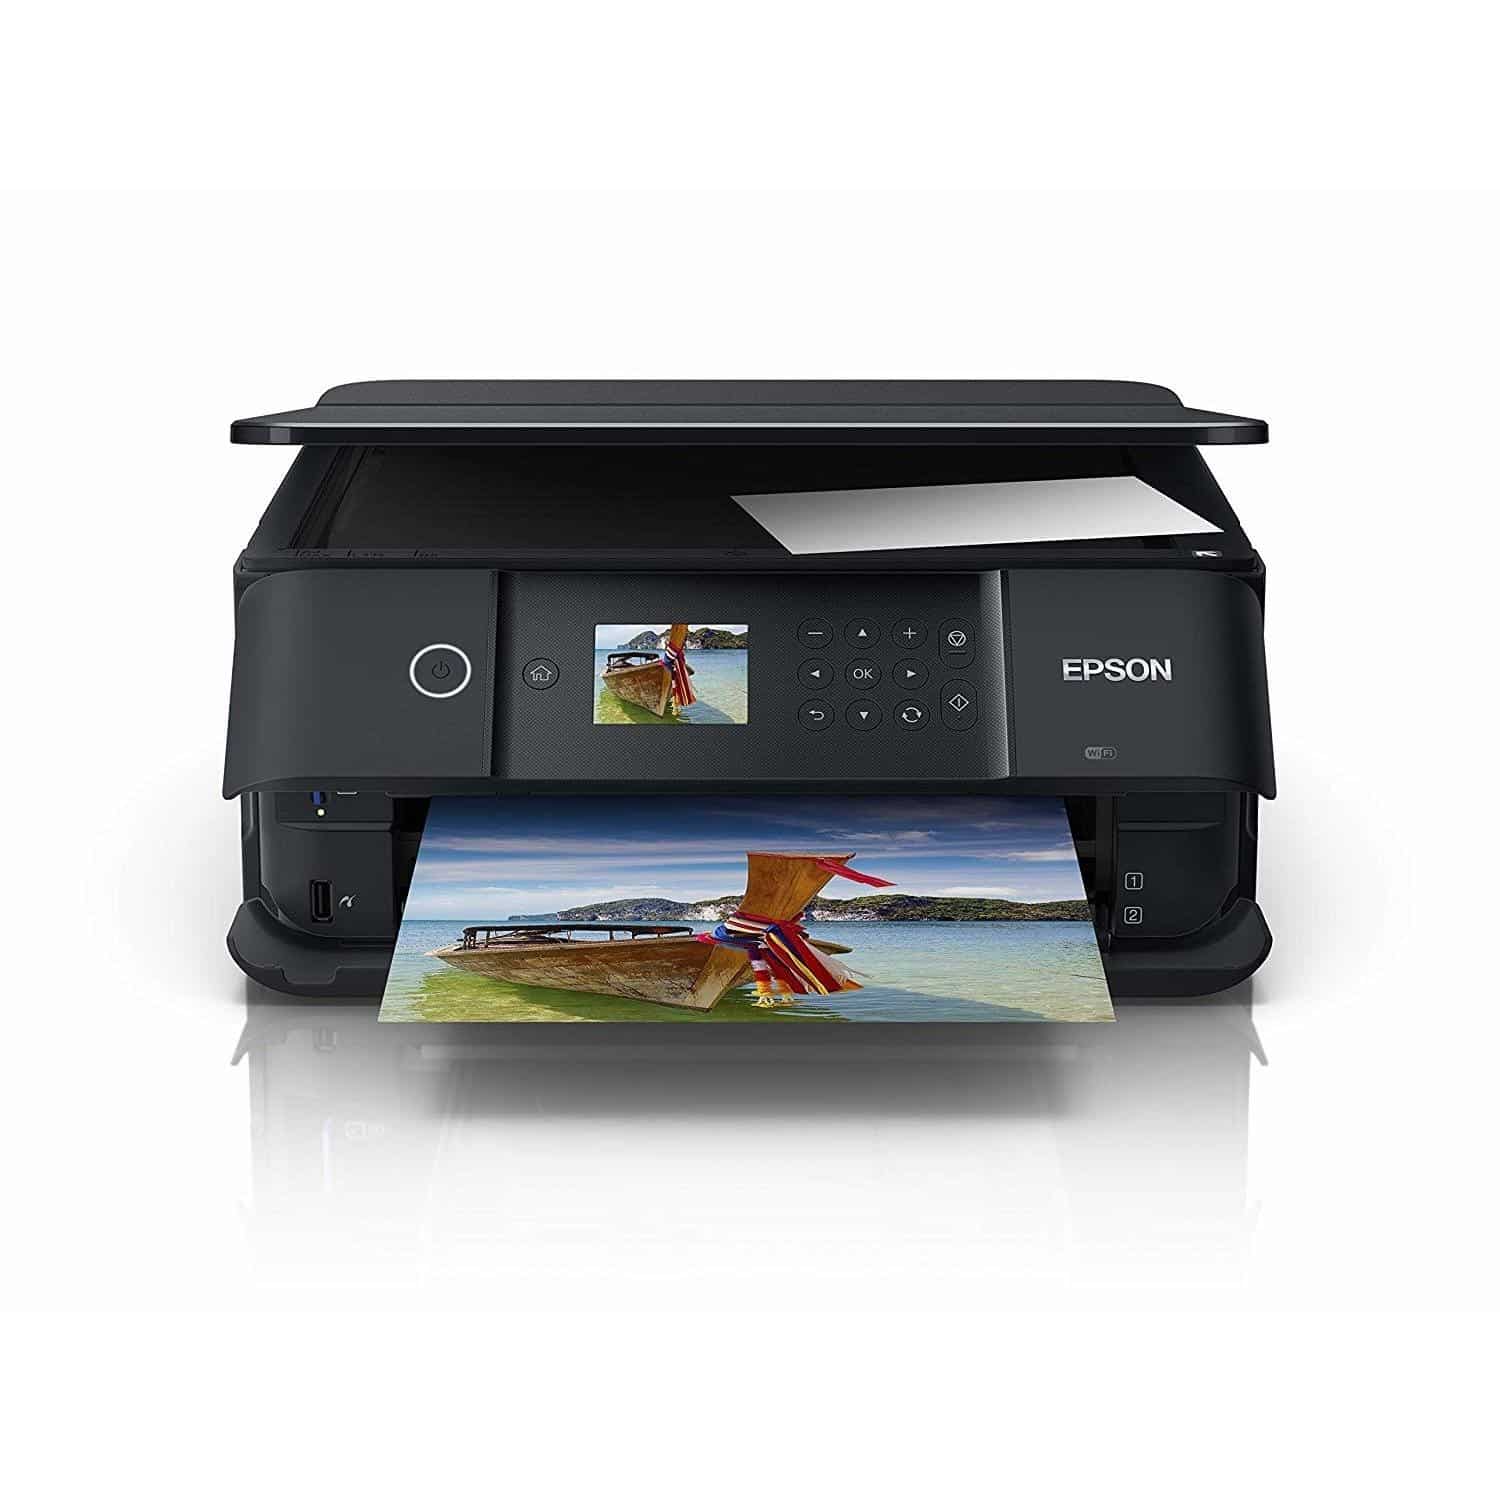 Epson XP-6100 Driver For Windows 7/10 & 11 Download